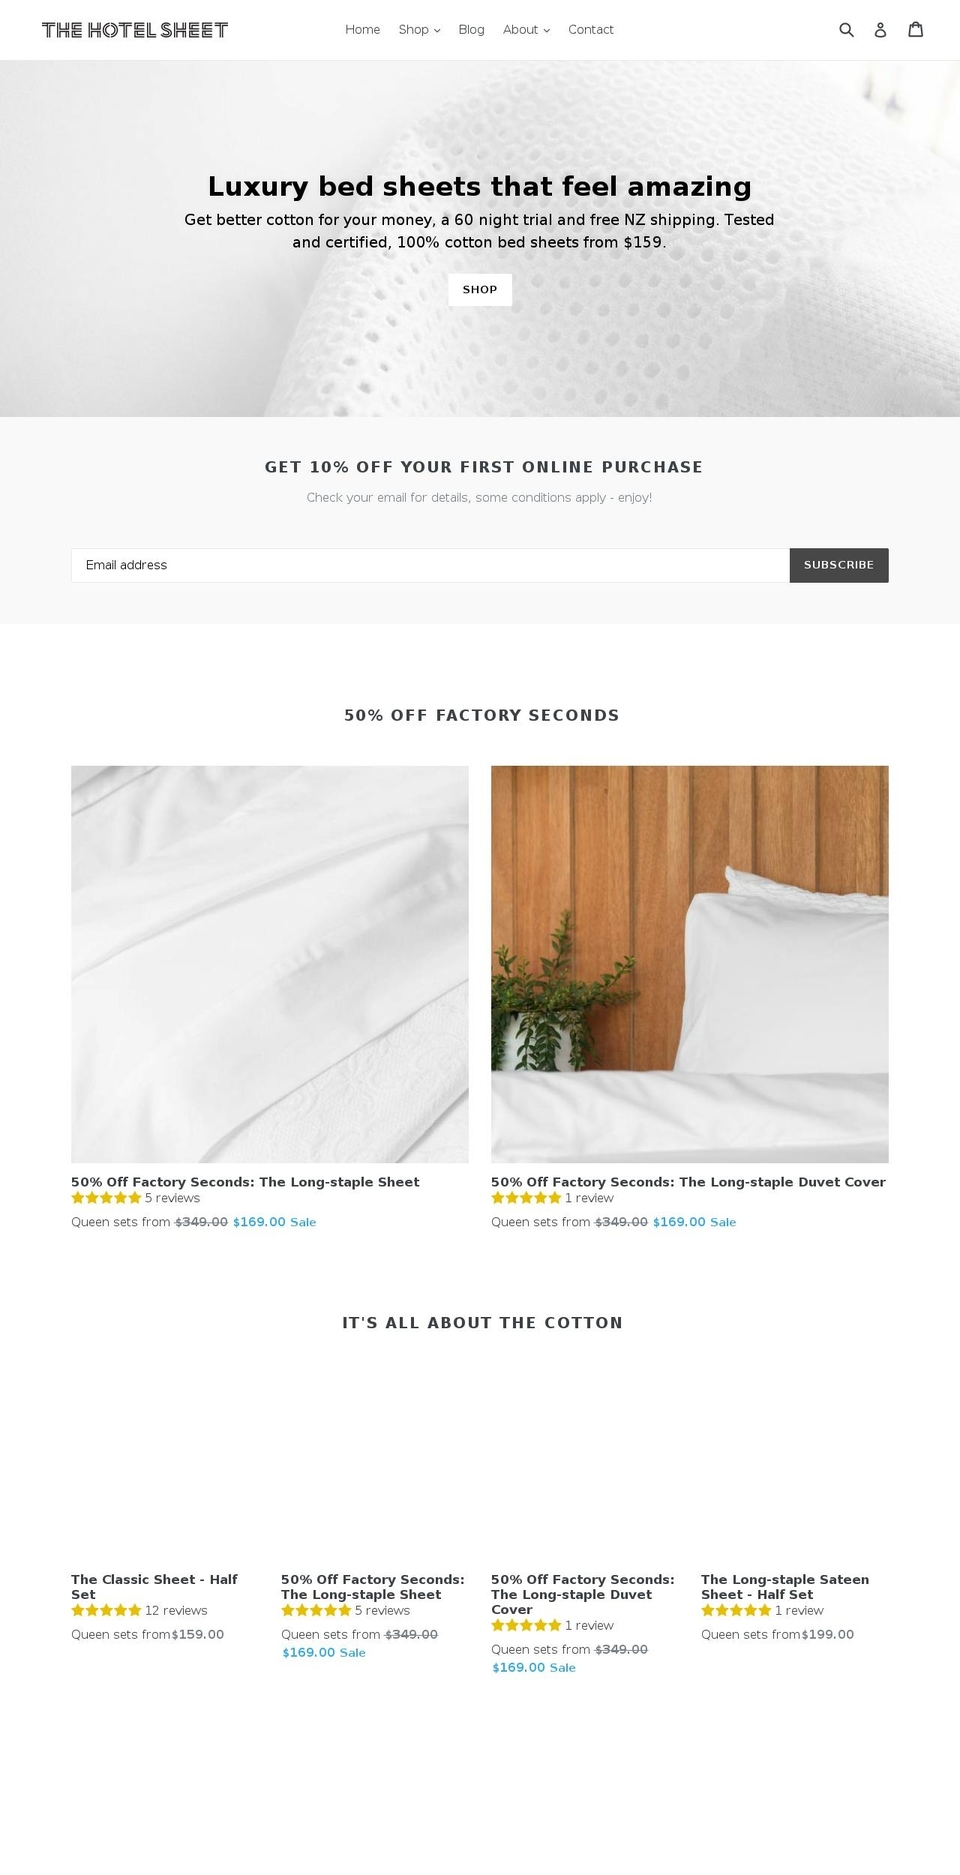 The Hotel Sheet v1.1 Shopify theme site example thehotelsheet.co.nz